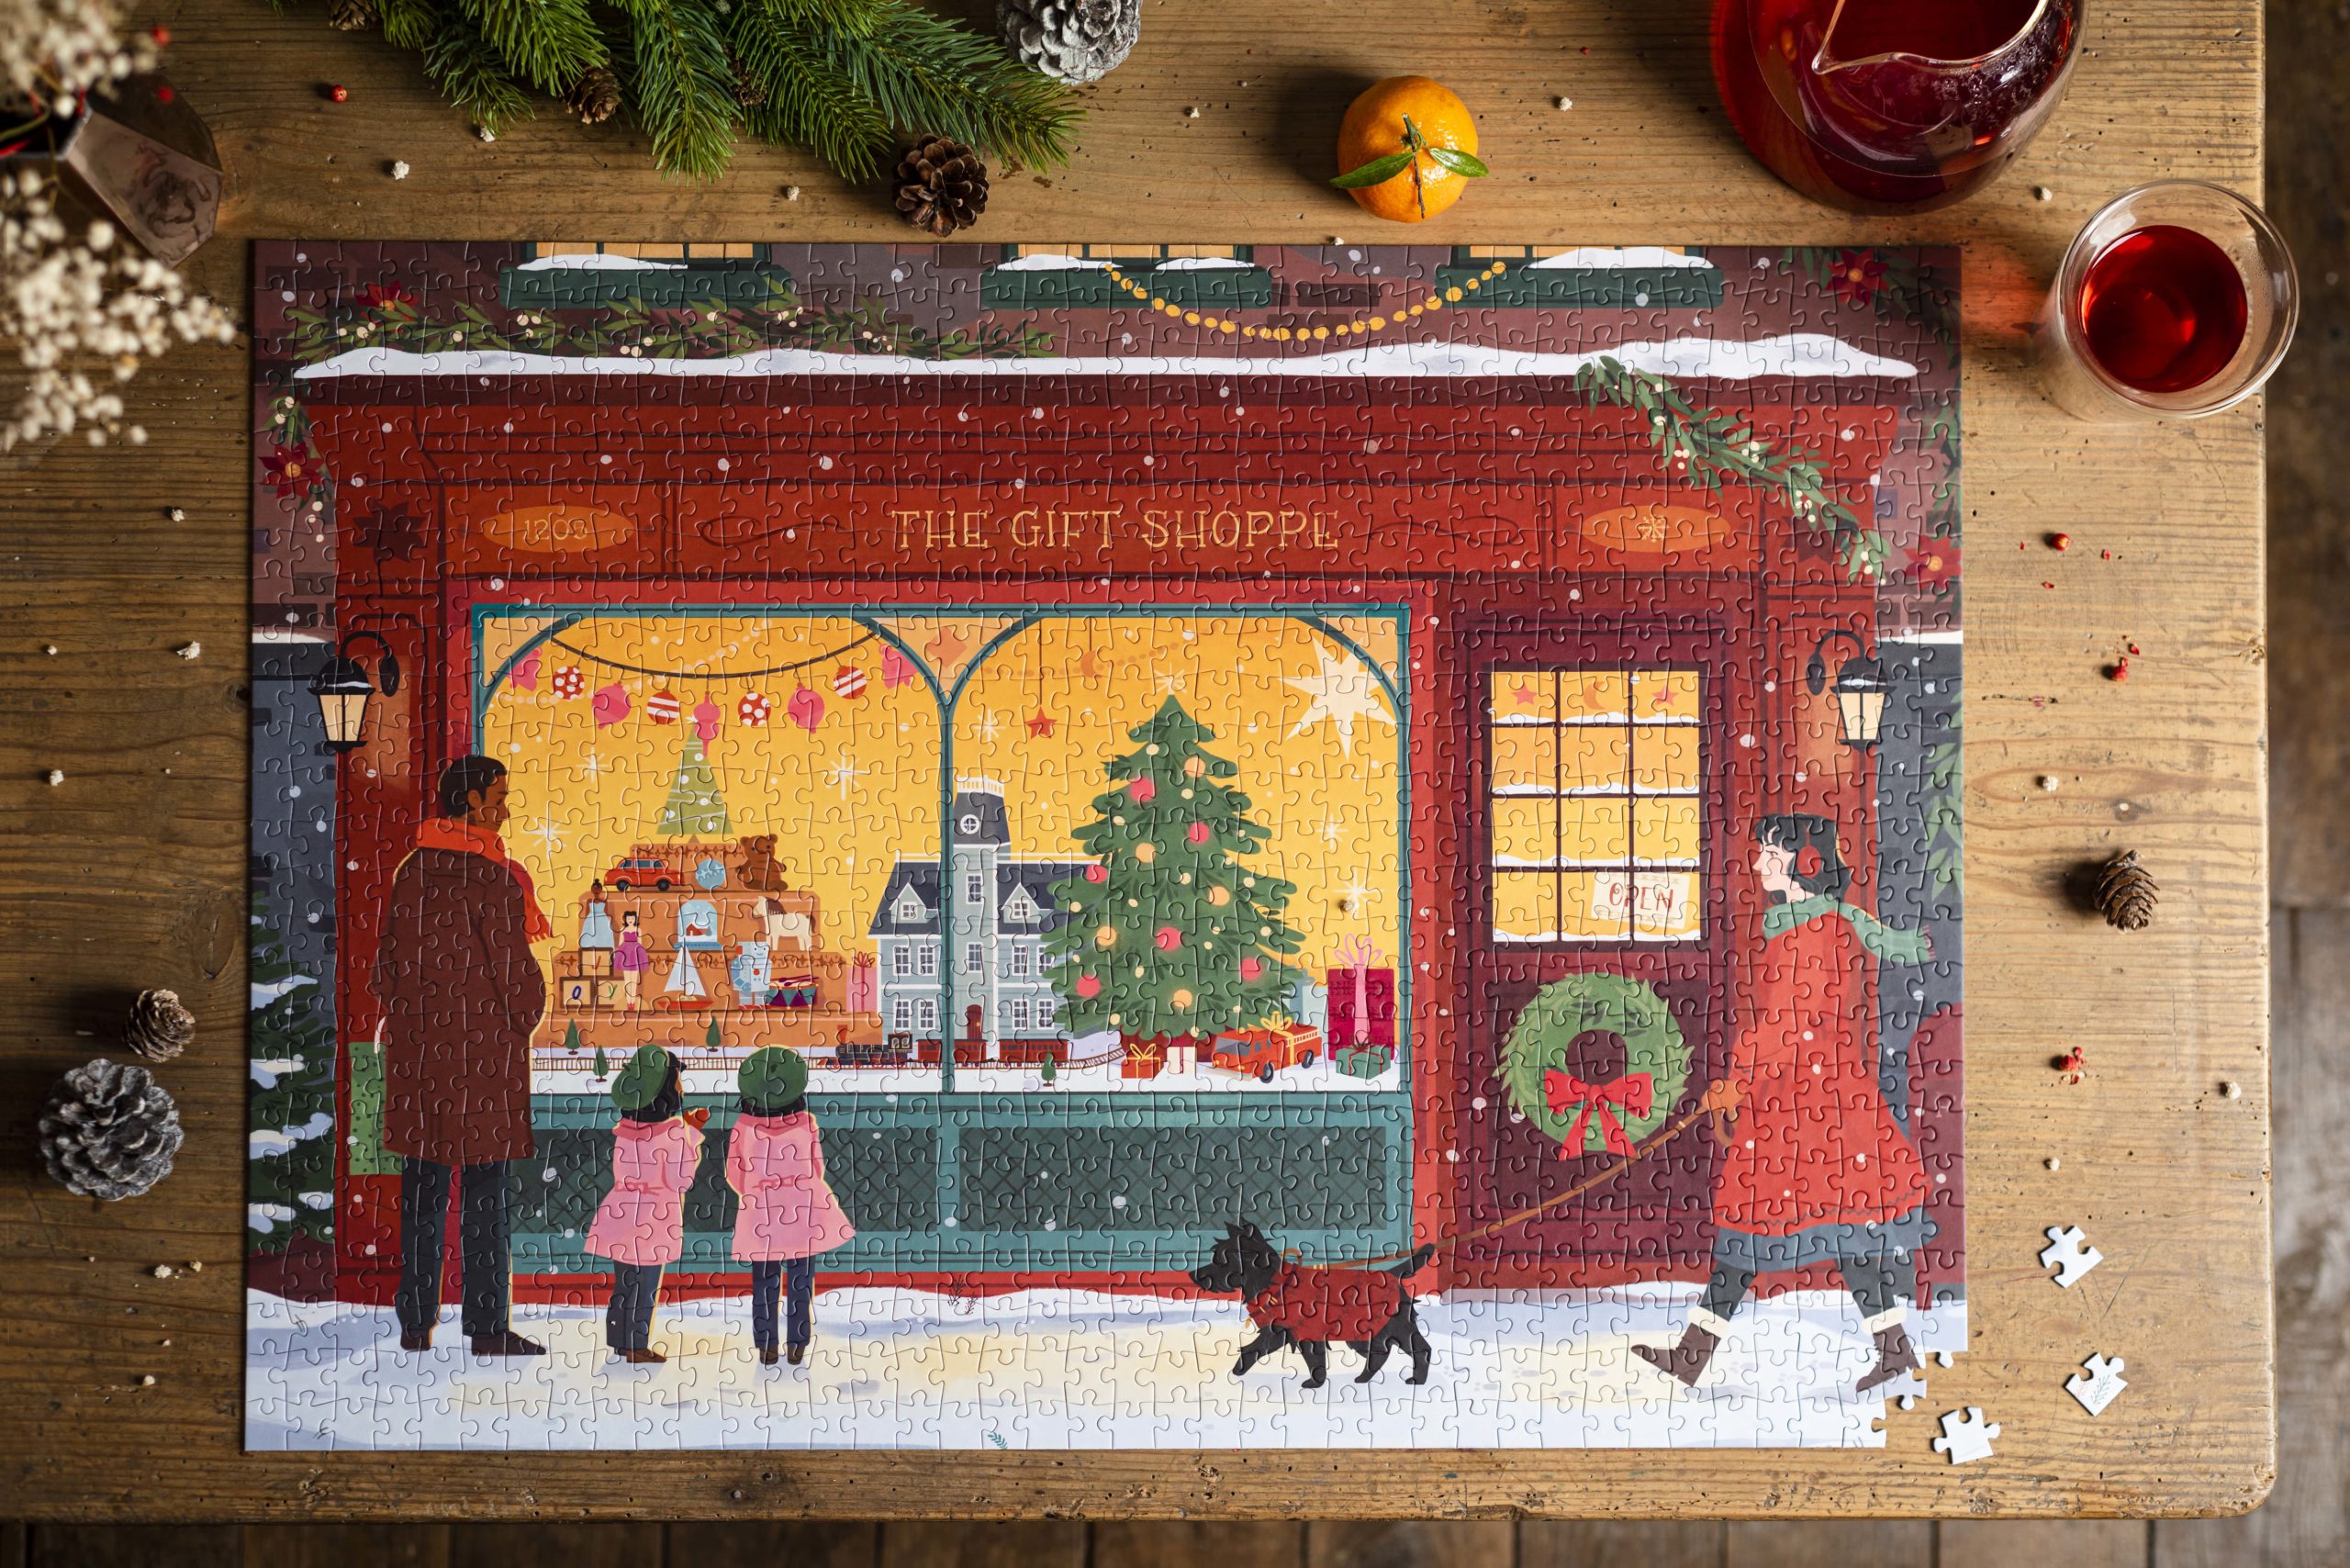 Puzzle Trevell ambiance de l'artiste Nicolle Lalonde : The gift shoppe